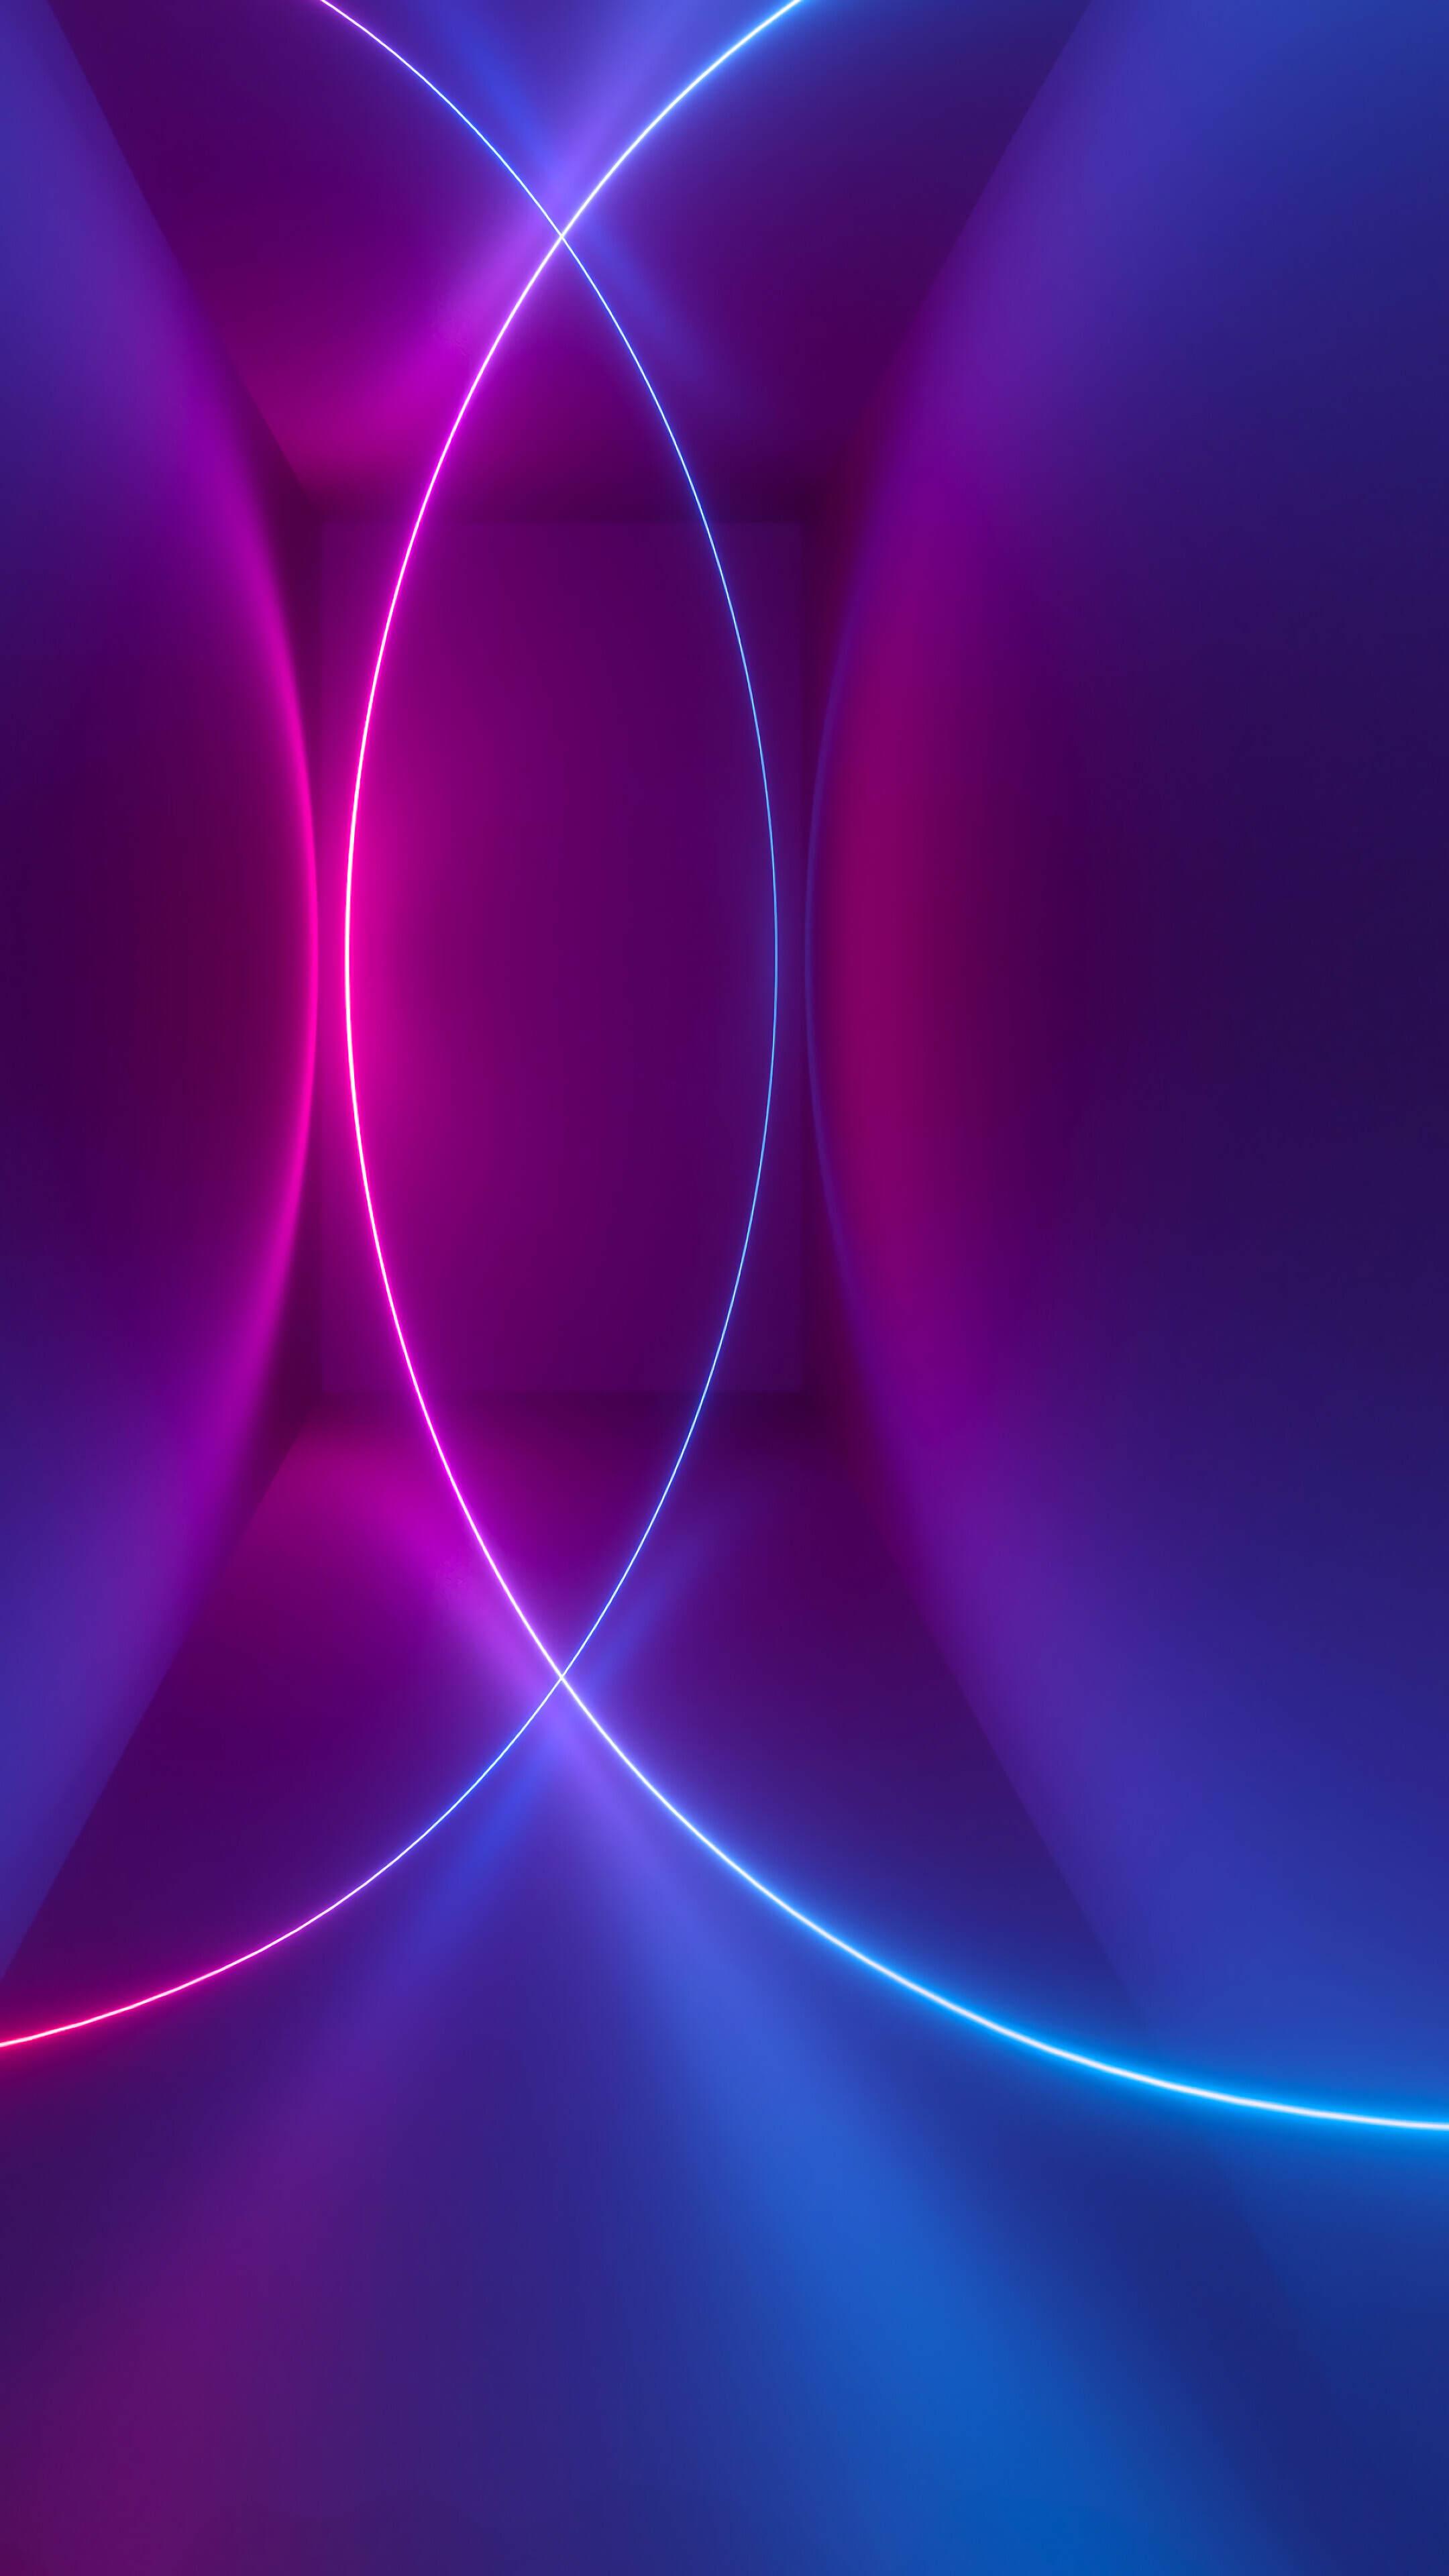 Geometry: Neon circles, Abstract, Intersecting line segments. 2160x3840 4K Wallpaper.